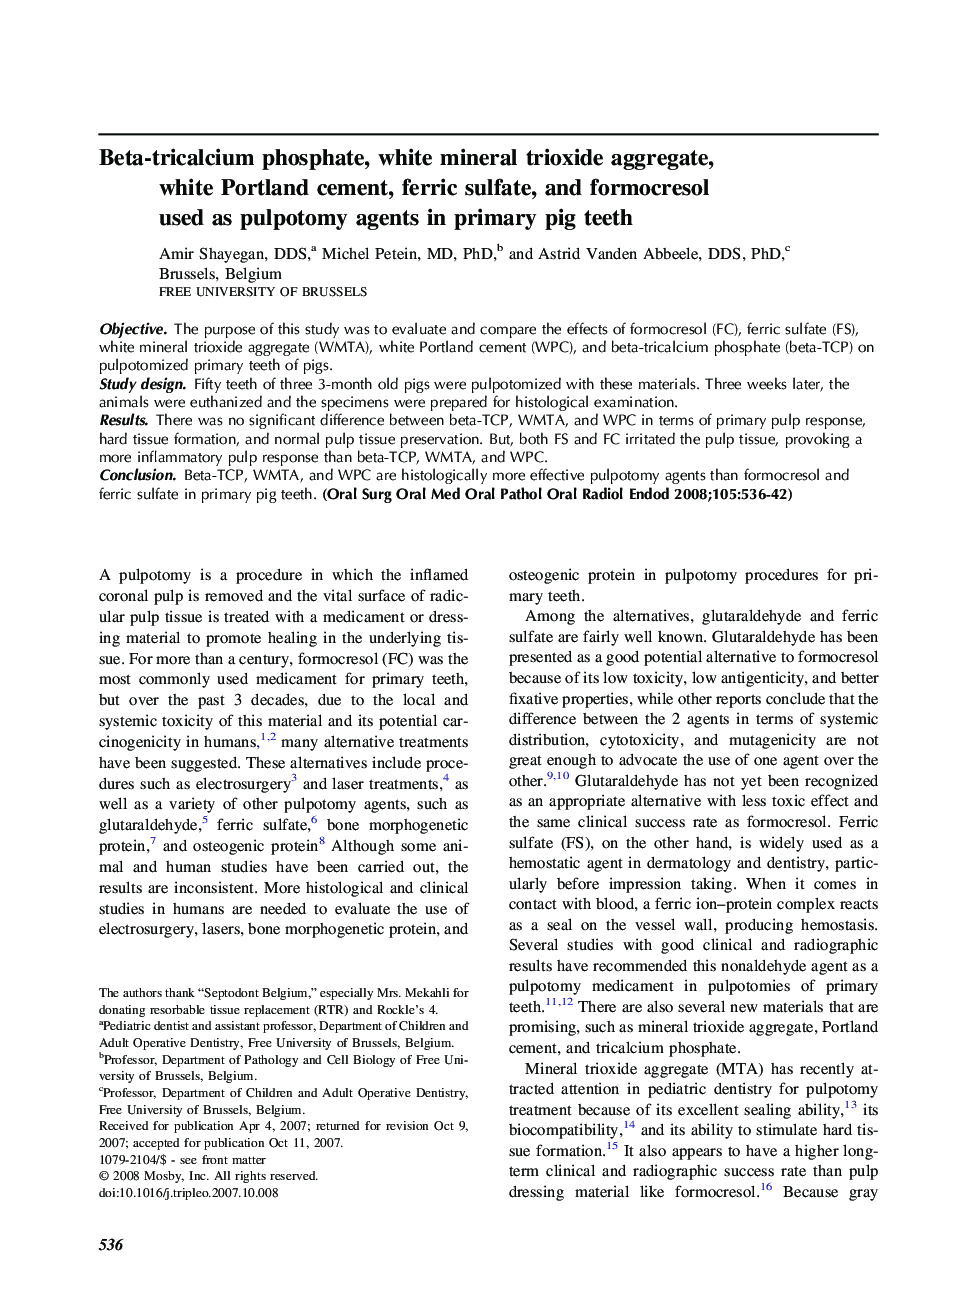 Beta-tricalcium phosphate, white mineral trioxide aggregate, white Portland cement, ferric sulfate, and formocresol used as pulpotomy agents in primary pig teeth 